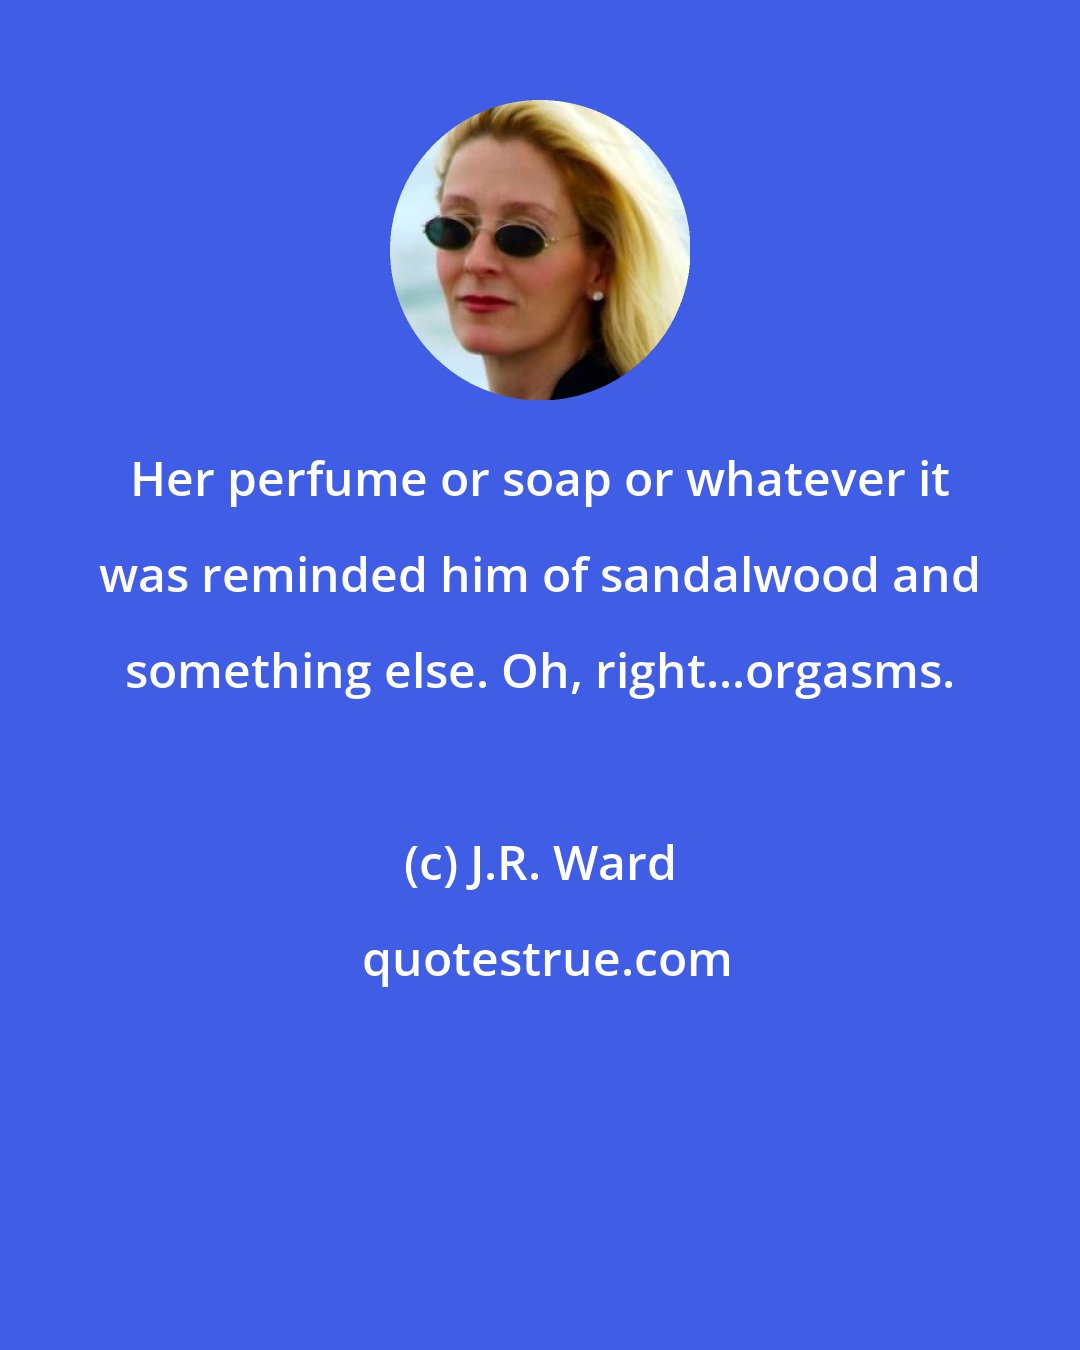 J.R. Ward: Her perfume or soap or whatever it was reminded him of sandalwood and something else. Oh, right...orgasms.